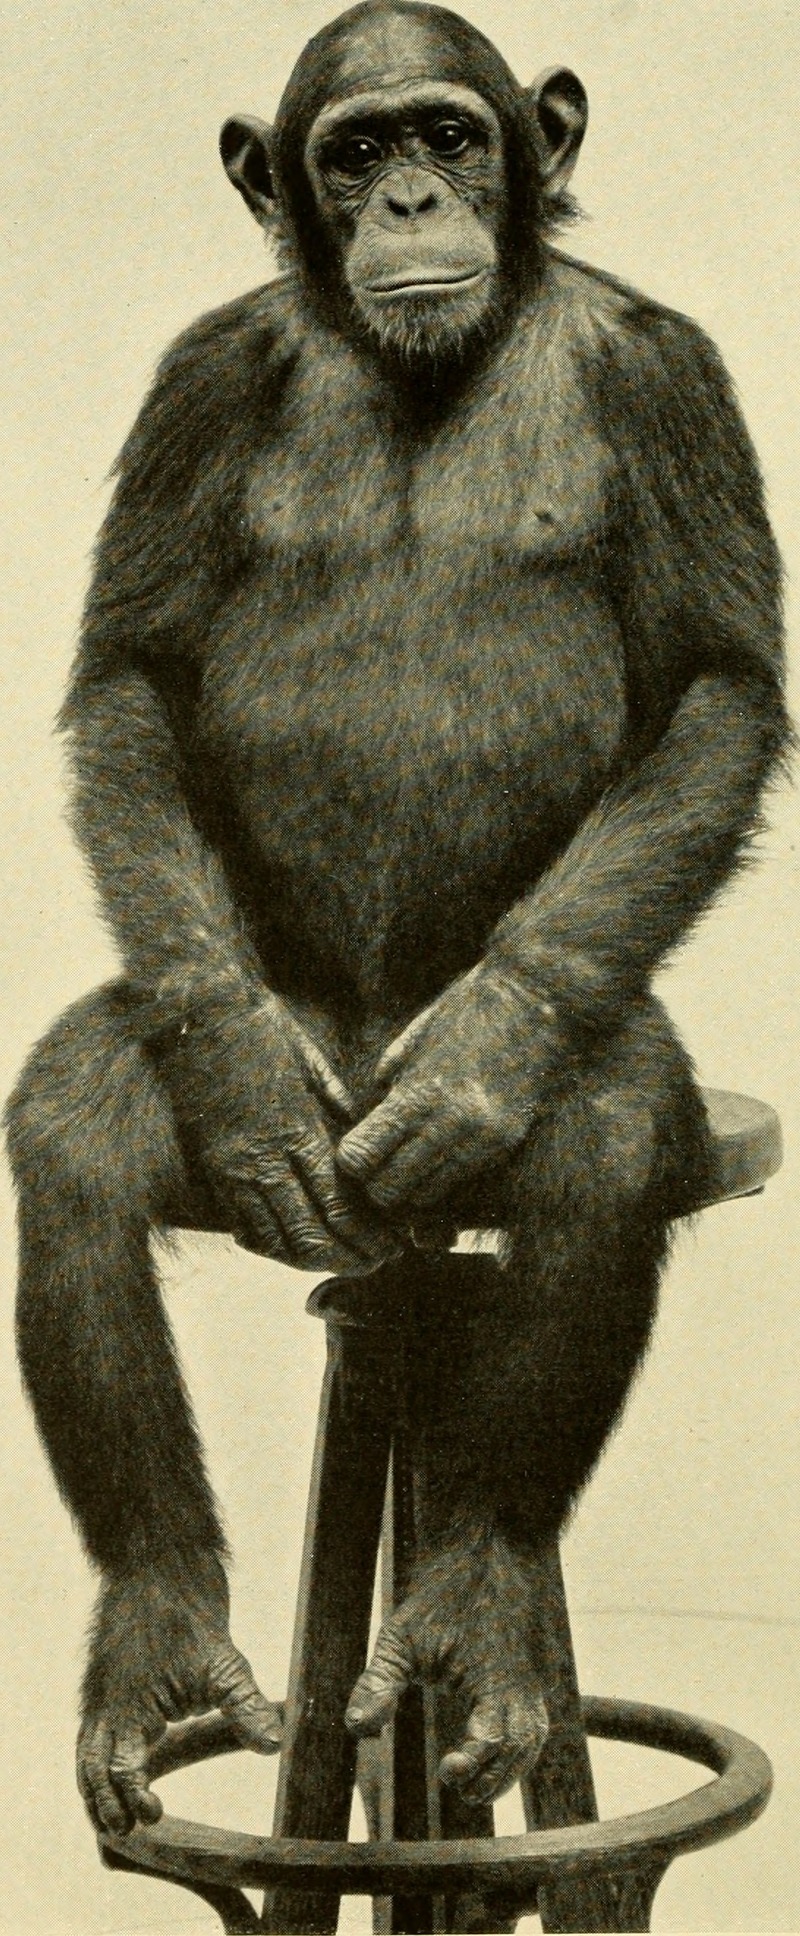 Annual report - New York Zoological Society (1910) (18427137332).jpg